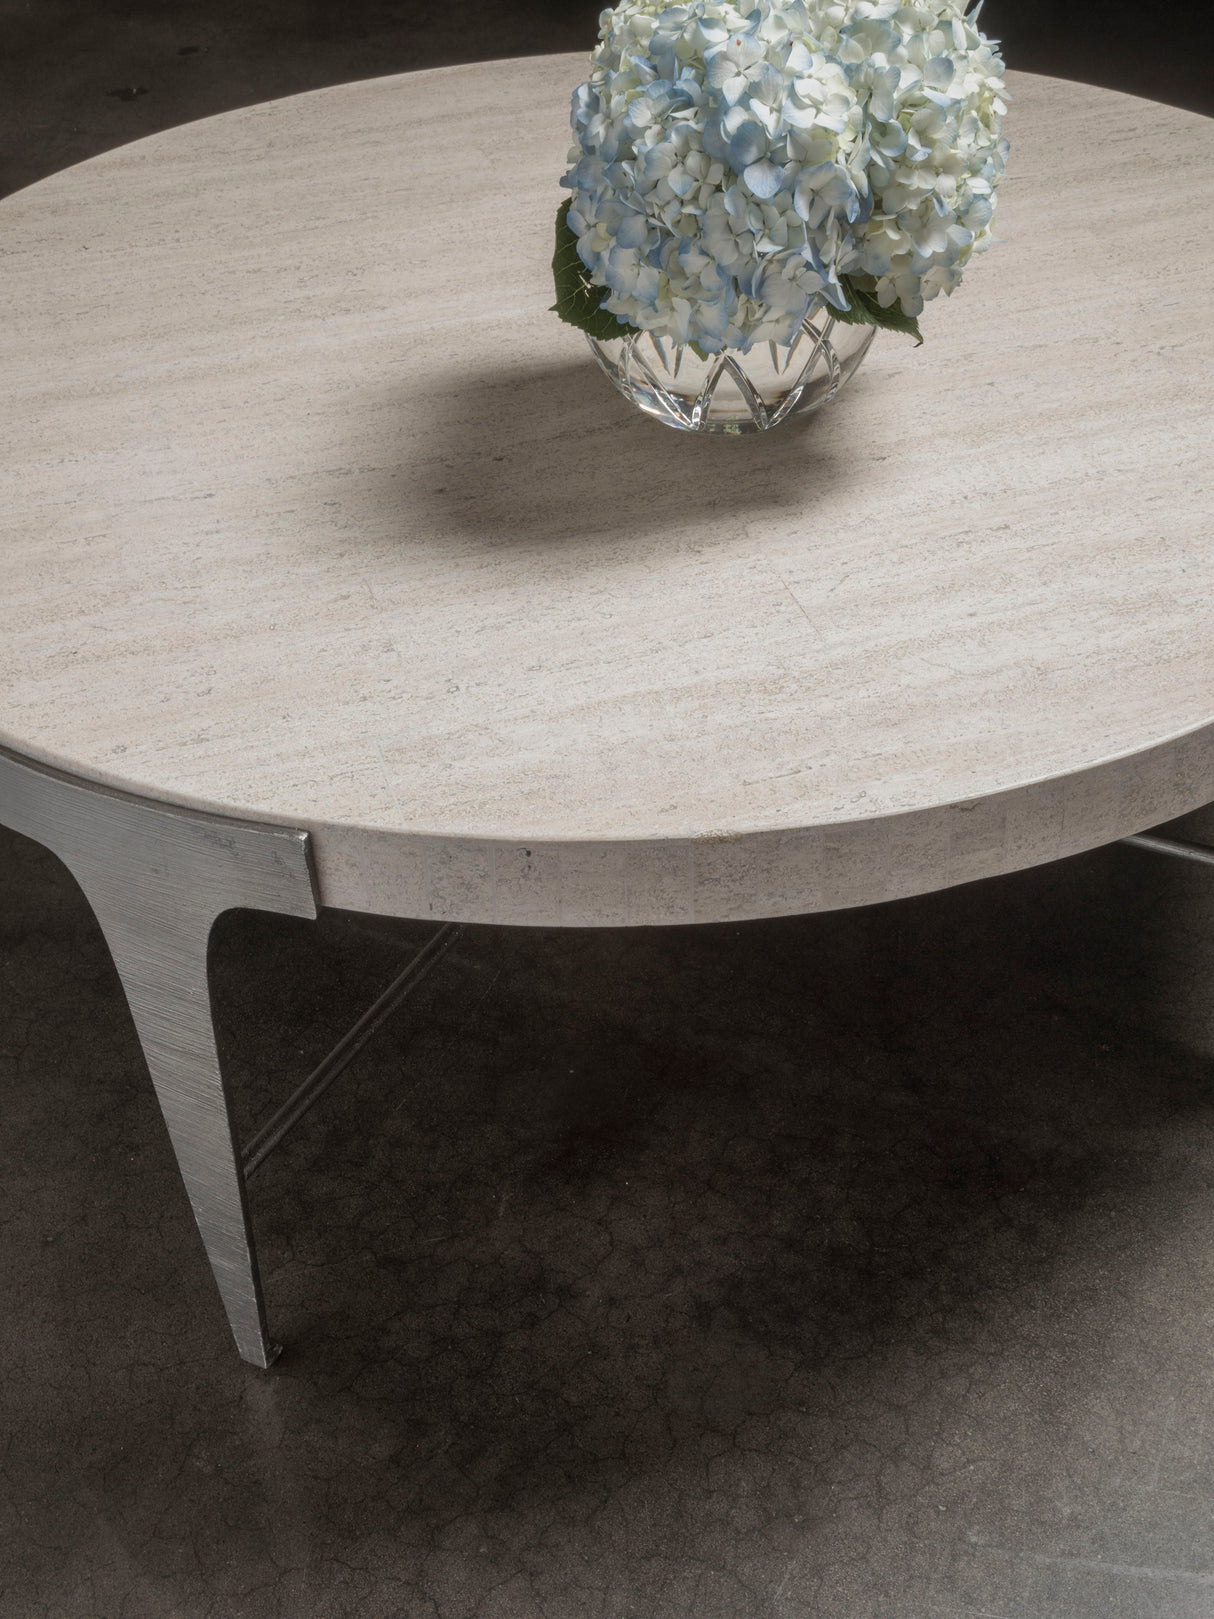 Signature Designs - Cachet Round Cocktail Table - Gray